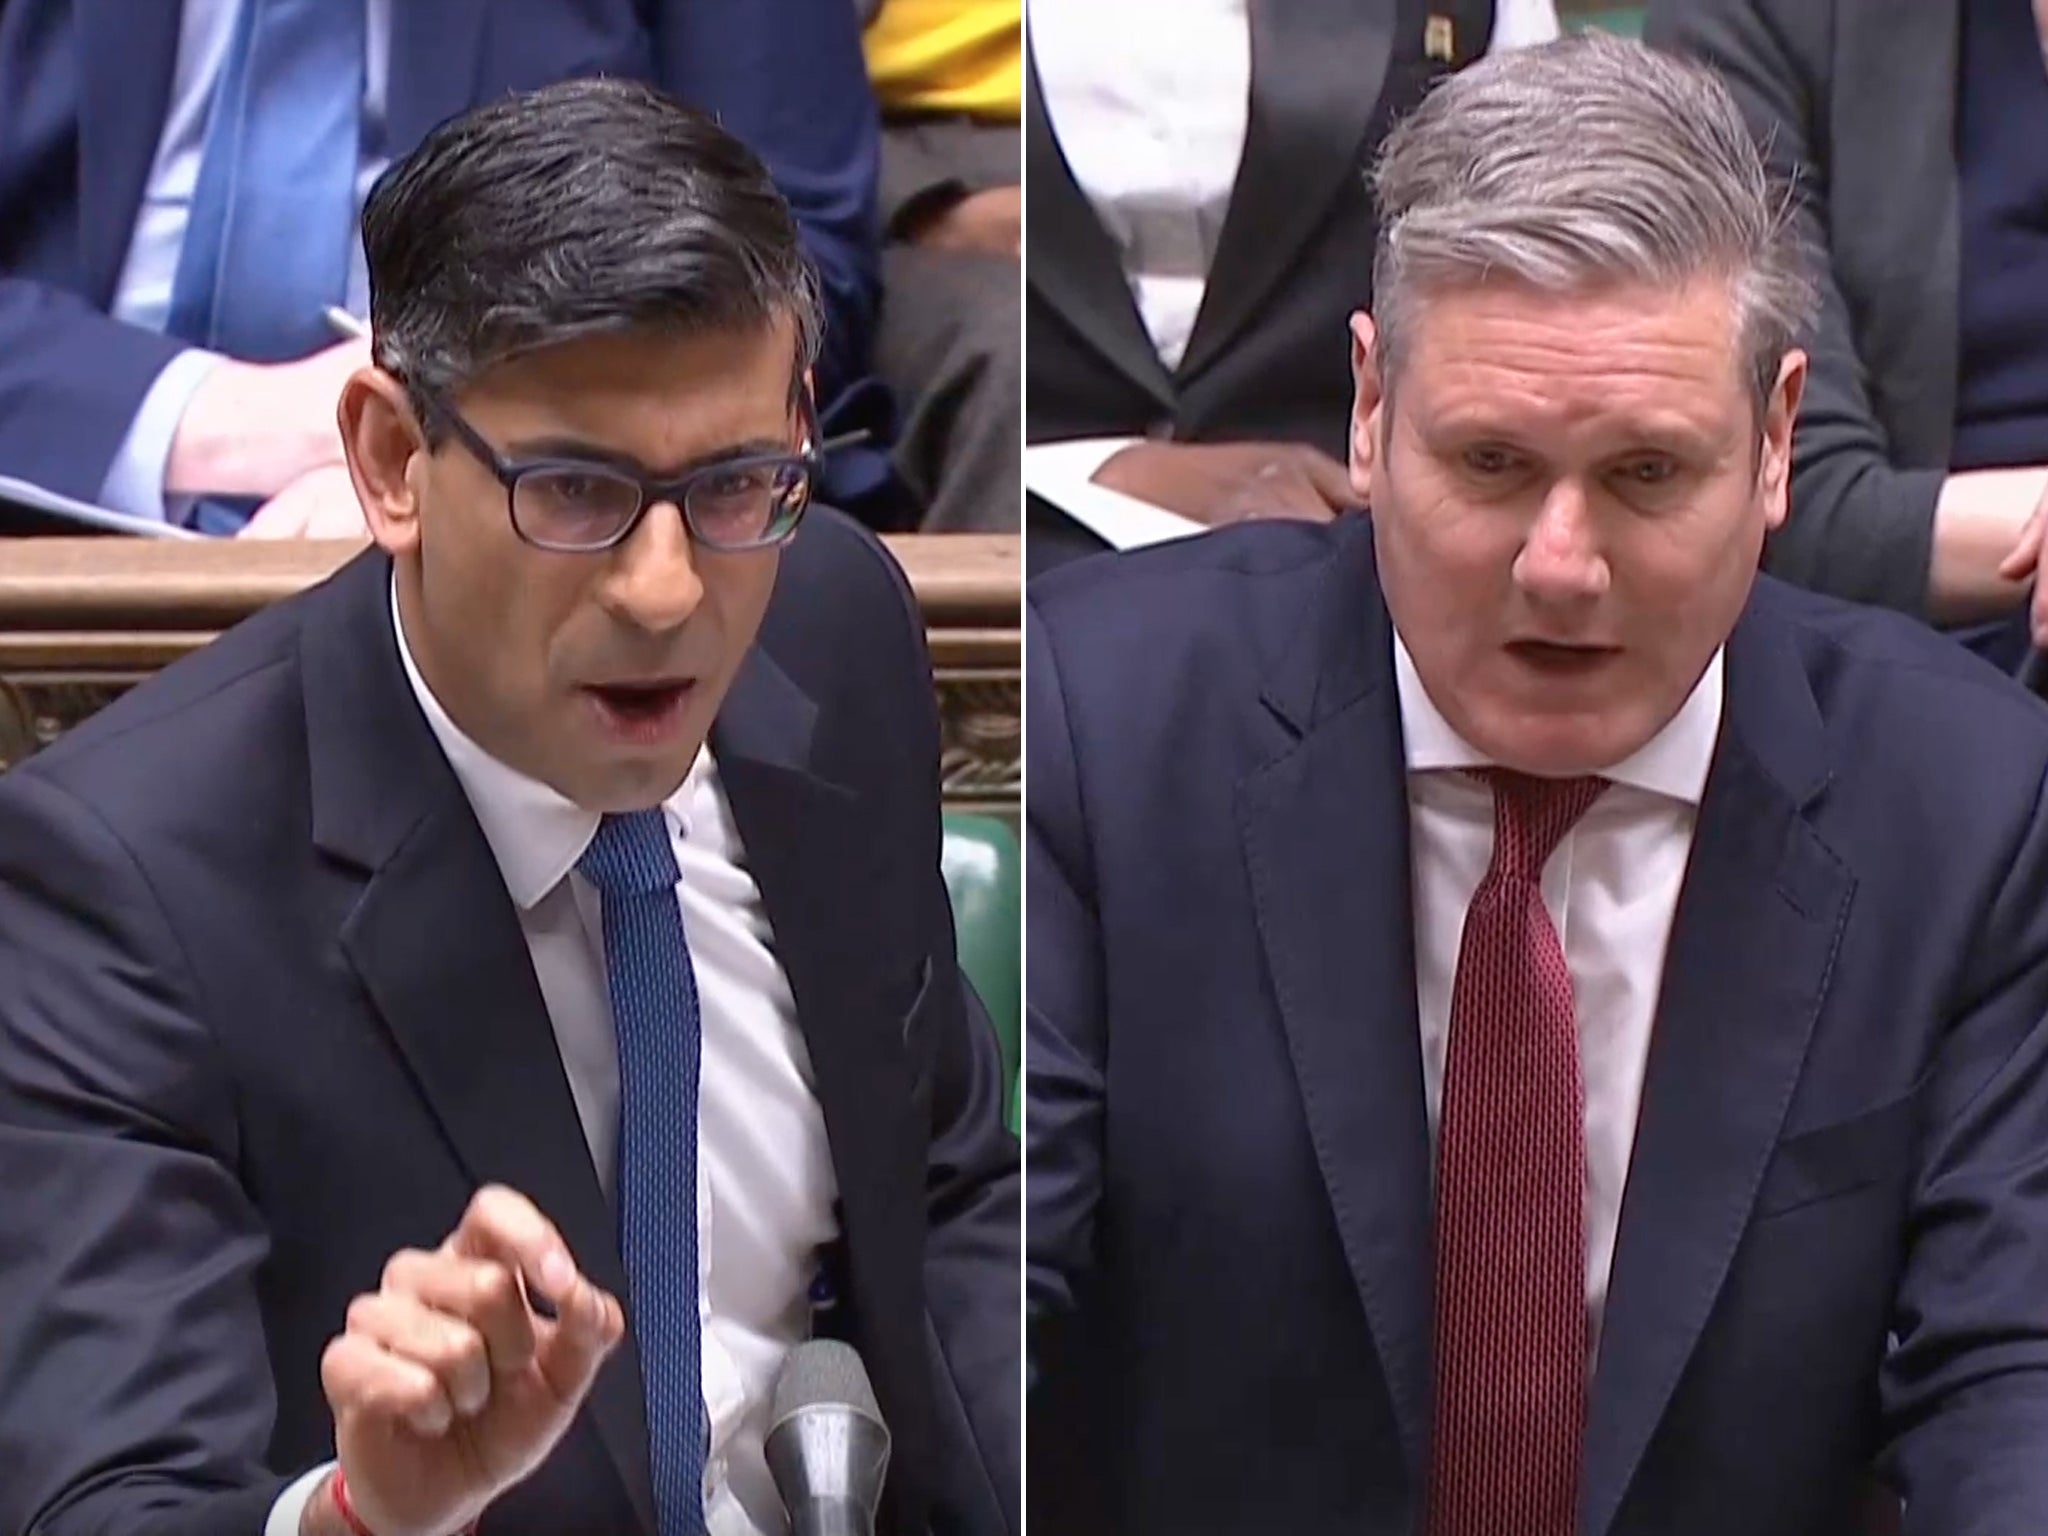 It was striking that Starmer had more success with the personal attack on Sunak’s family for being rich than in his opening questions about economics